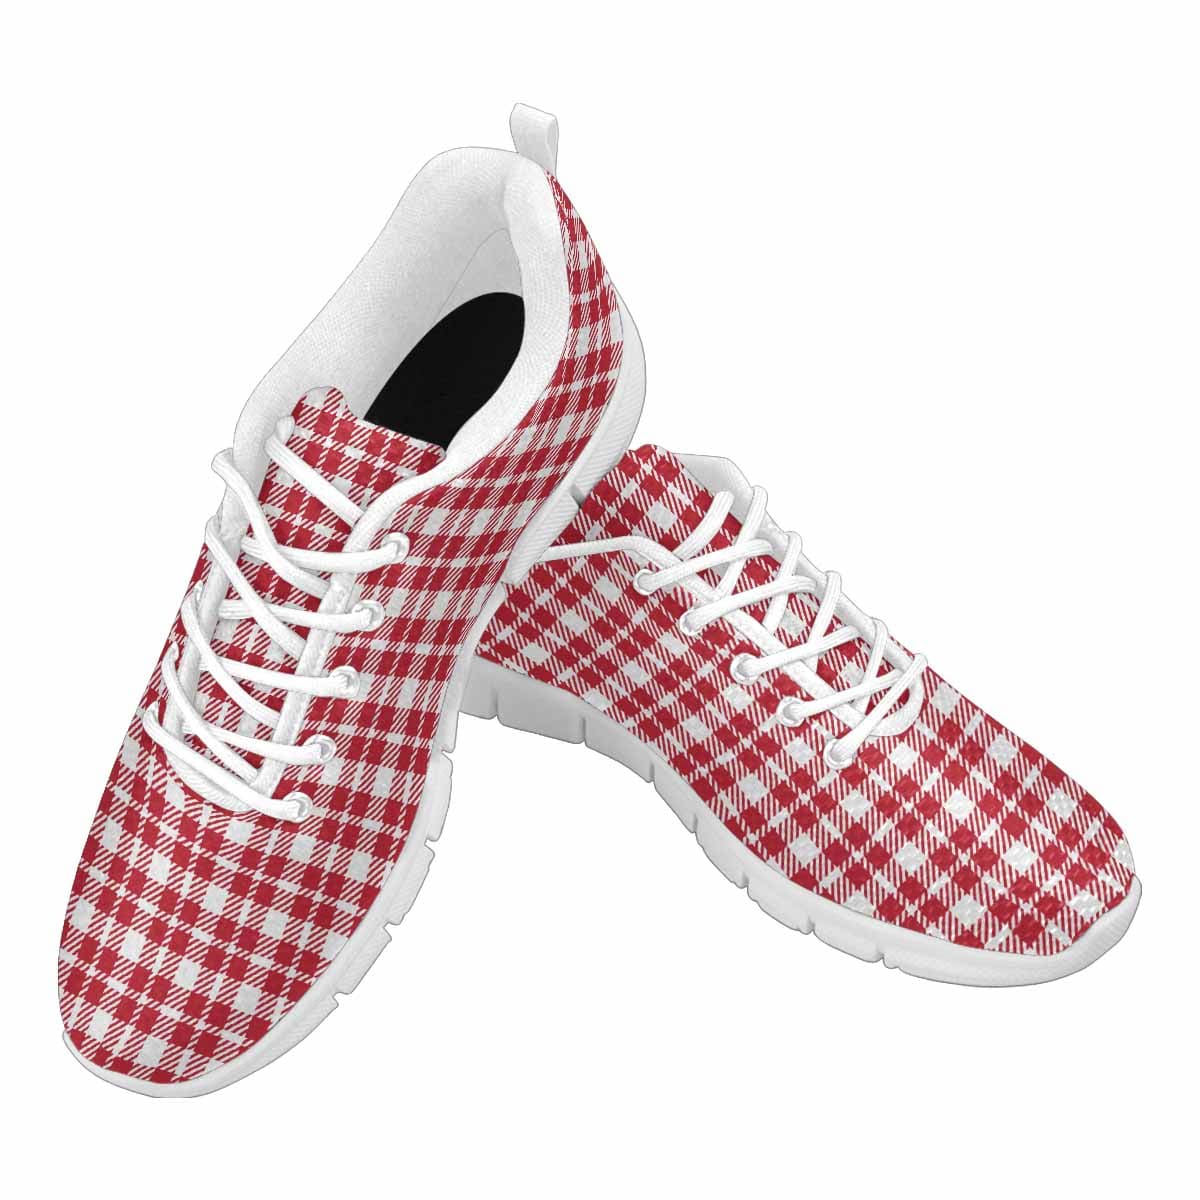 Sneakers For Men Buffalo Plaid Red And White - Running Shoes Dg861 - Mens